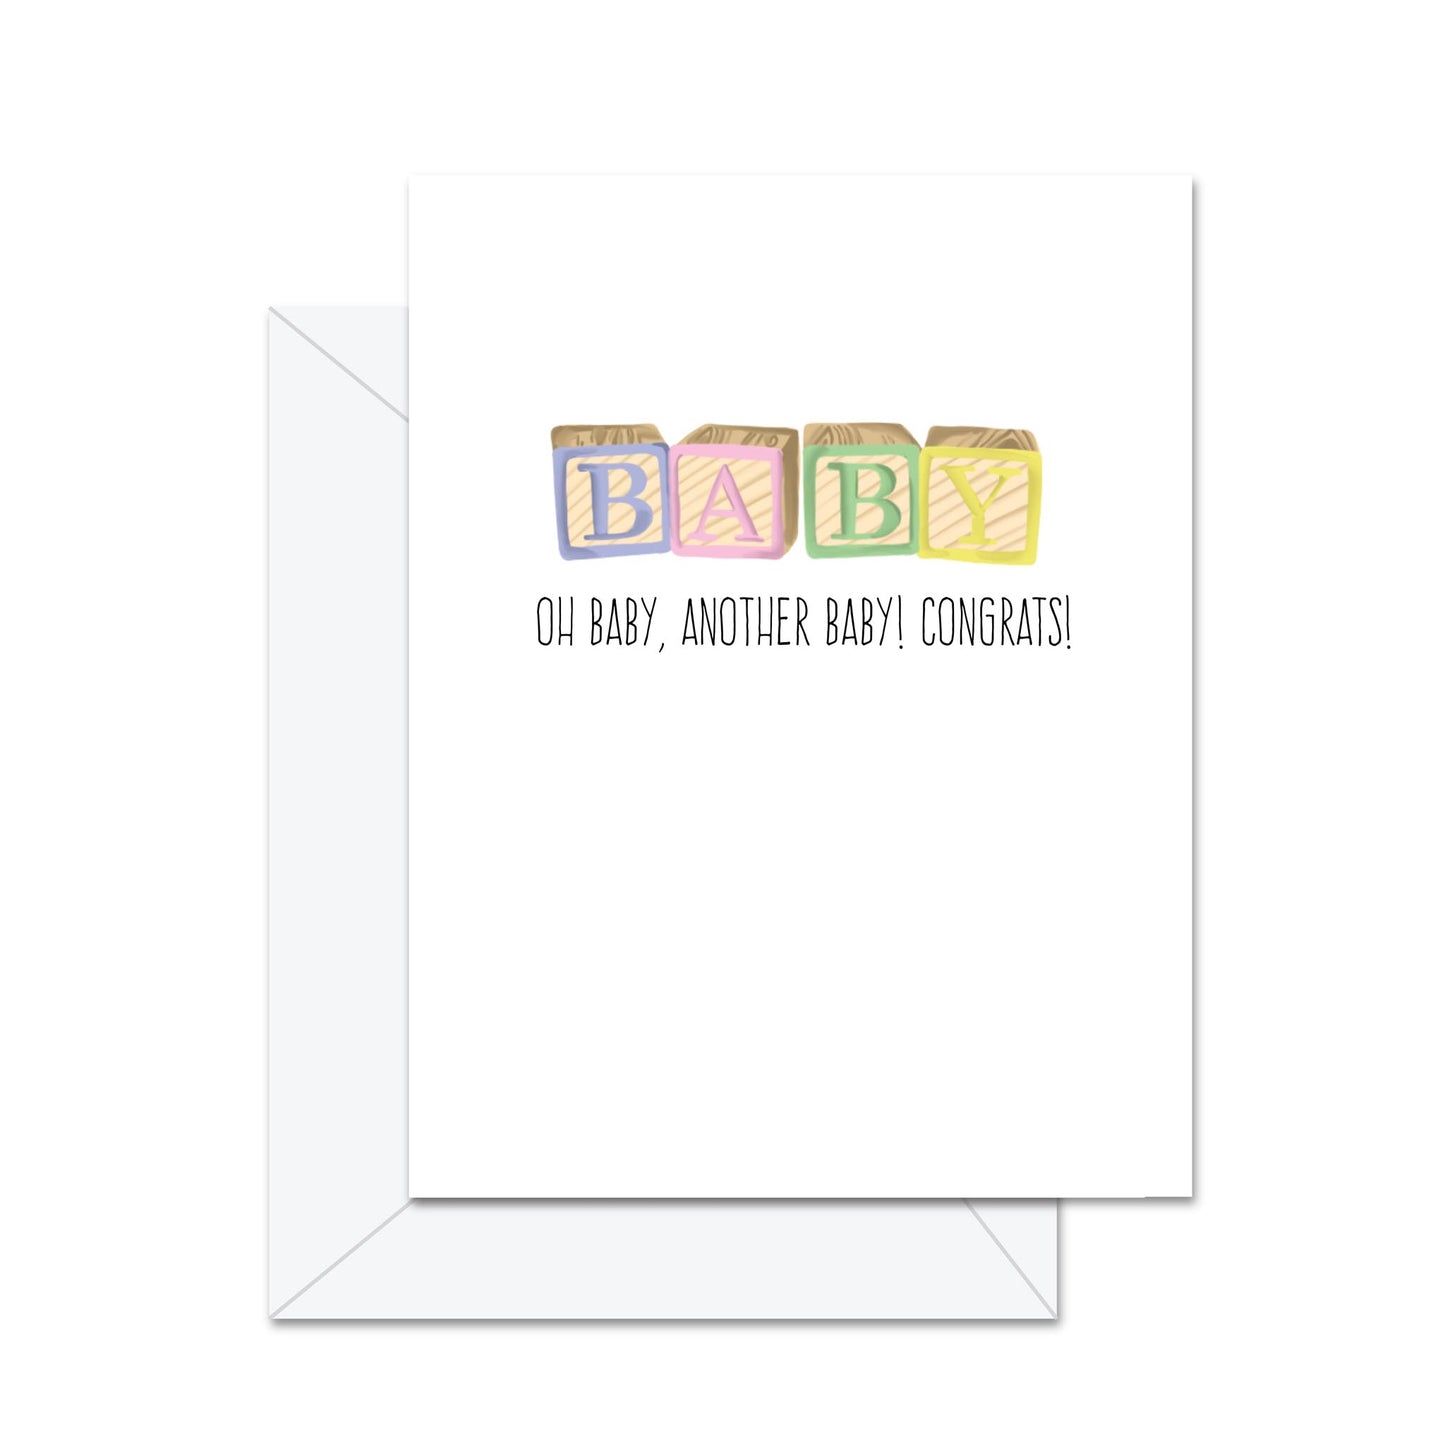 Oh Baby, Another Baby! Congrats! - Greeting Card